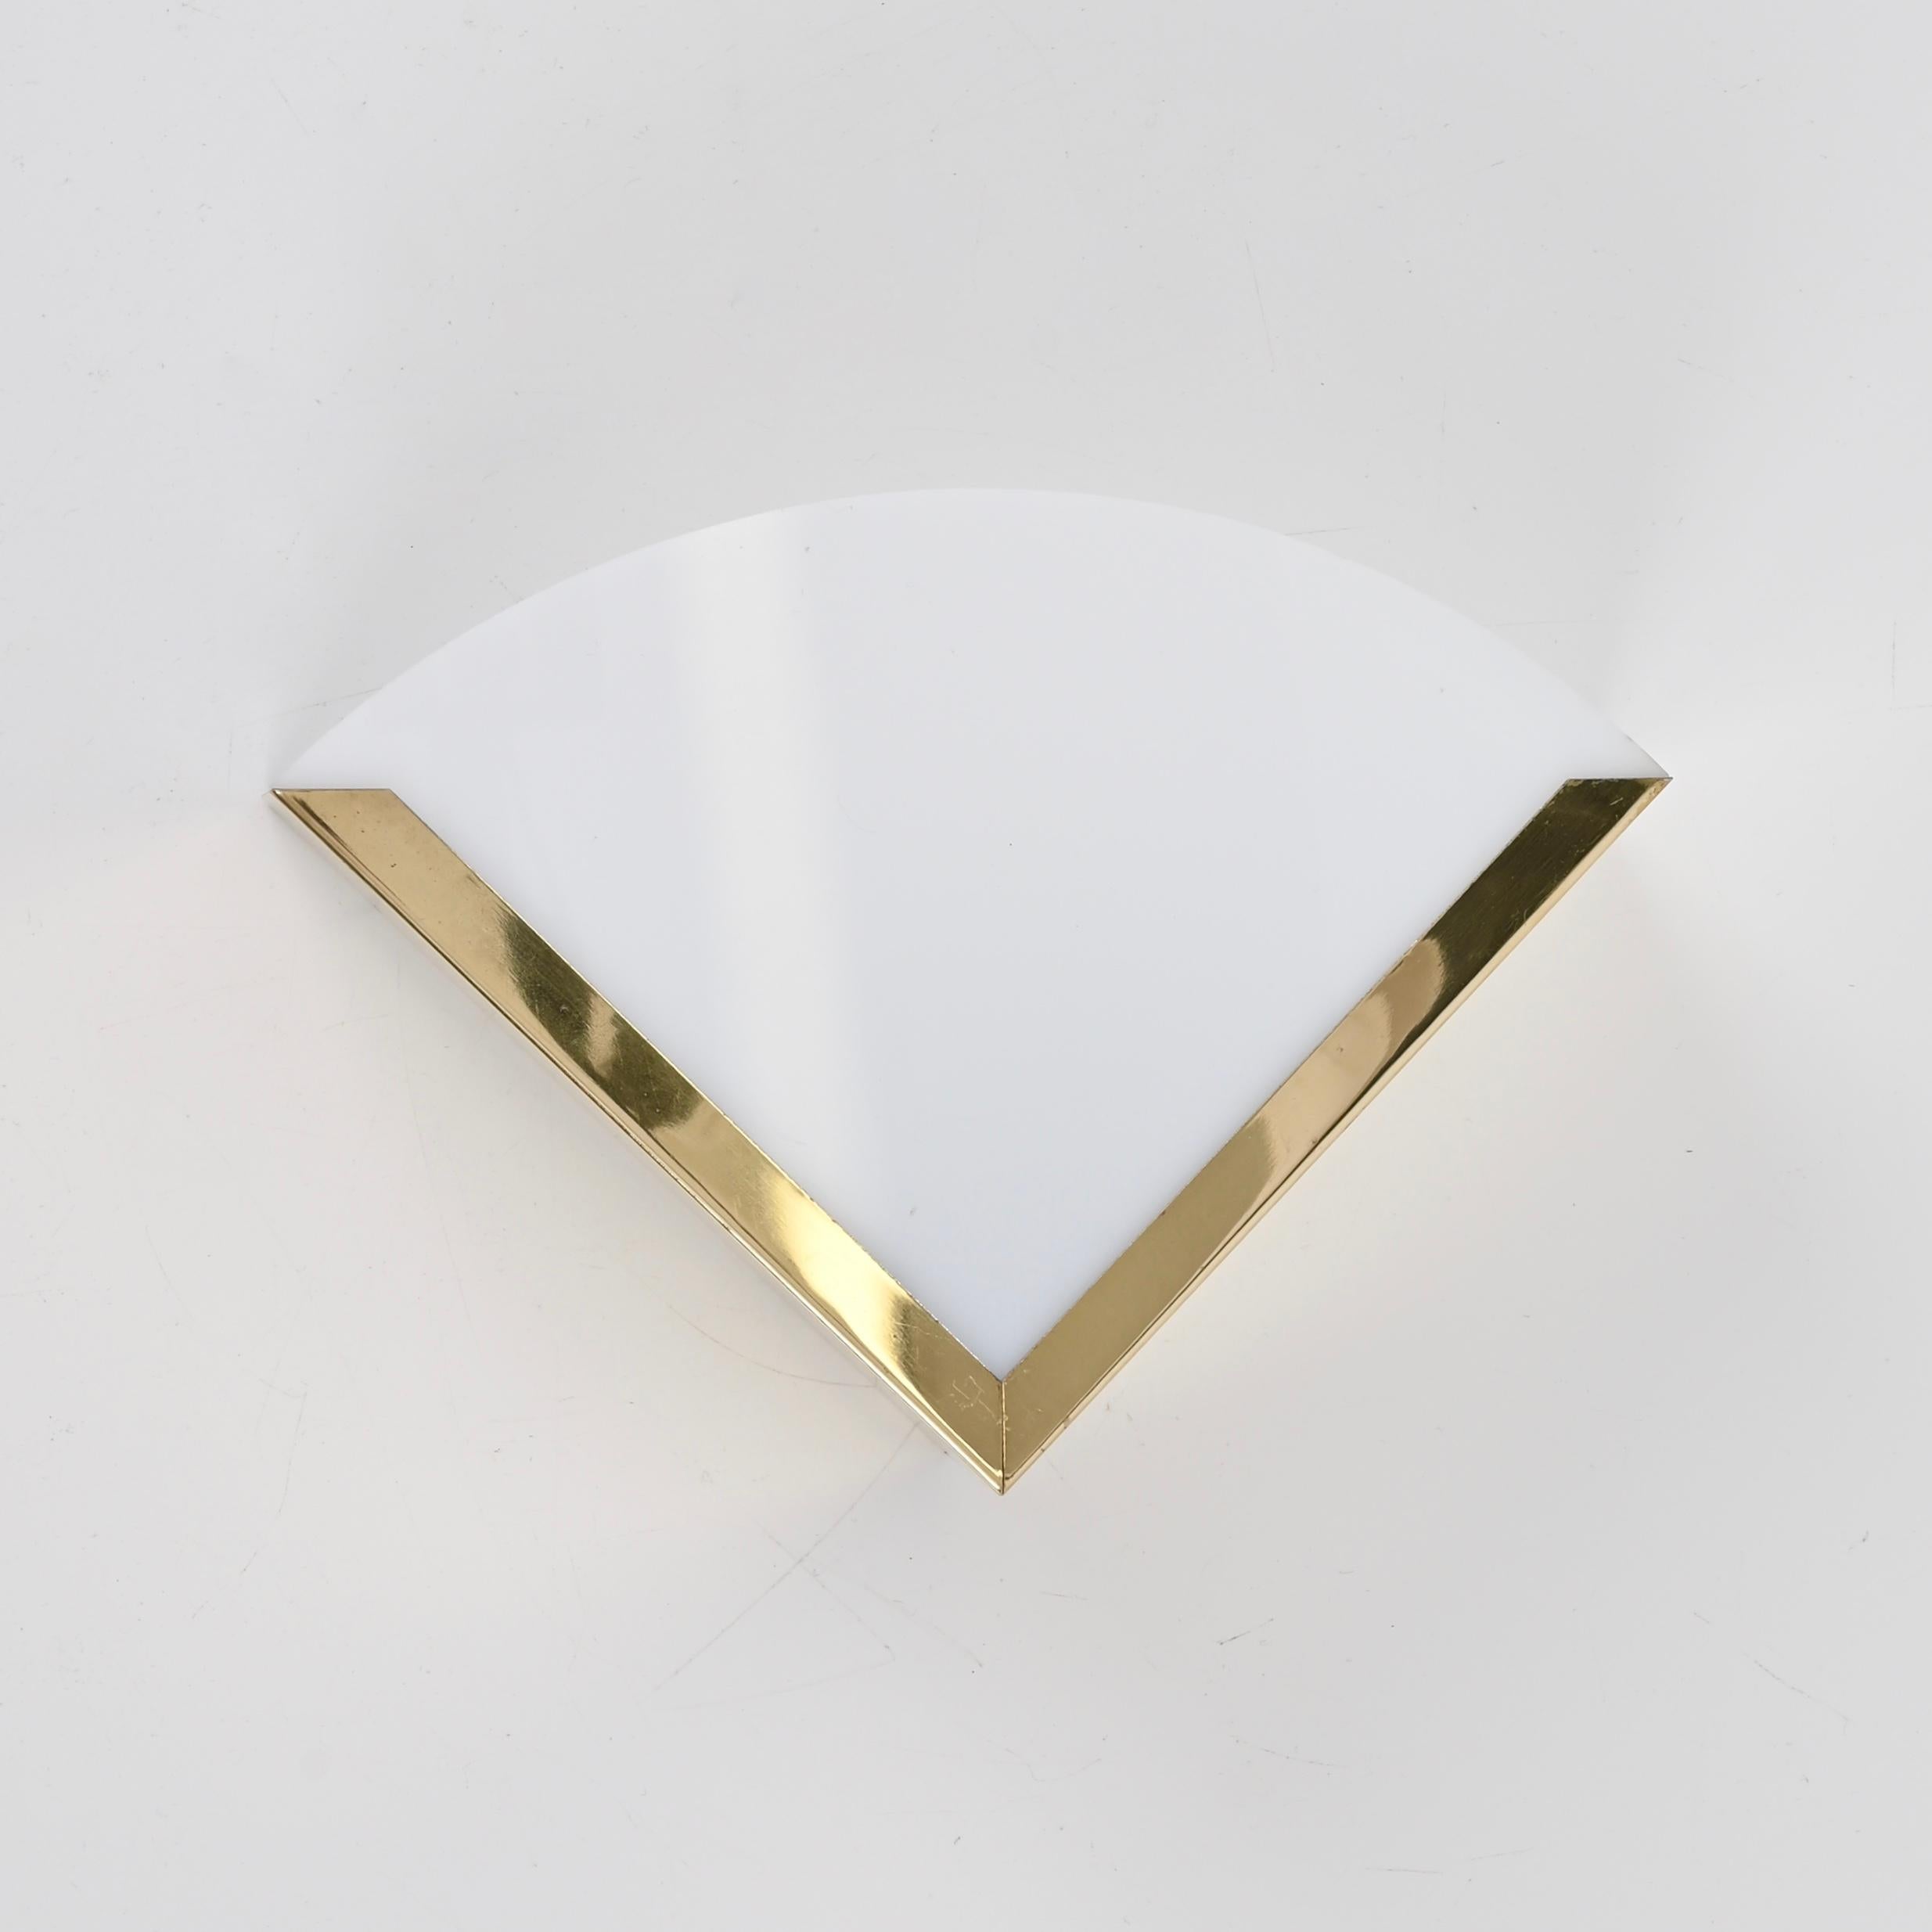 Metal Italian Triangular Sconces in Brass and White Perspex, Italy 1970s For Sale